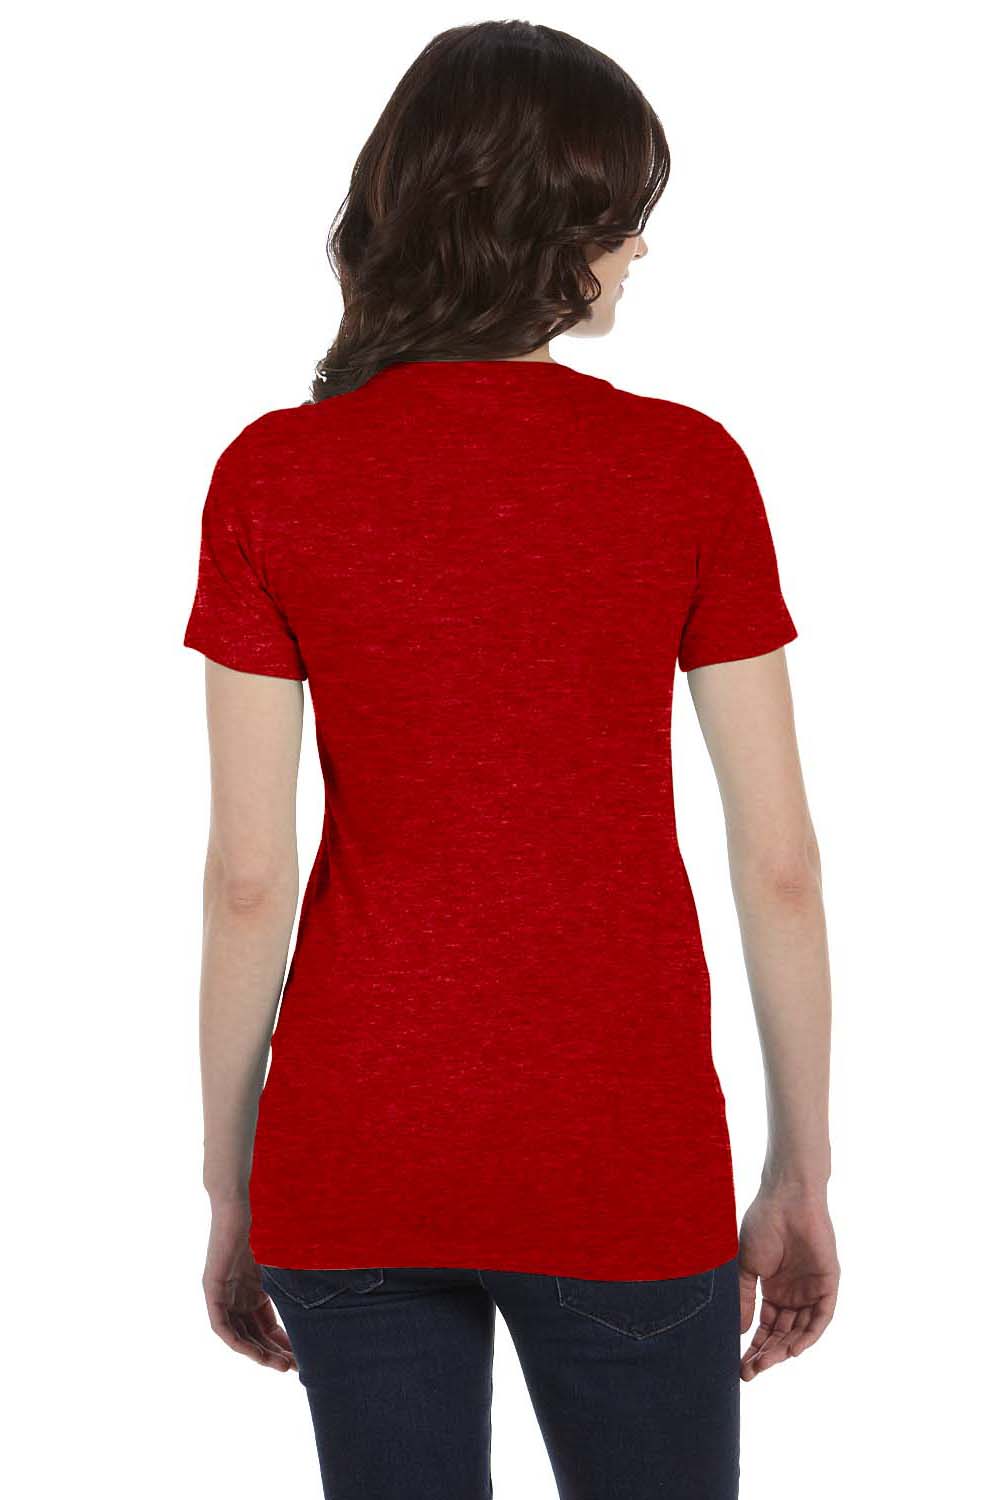 Bella + Canvas 6004 Womens The Favorite Short Sleeve Crewneck T-Shirt Heather Red Back